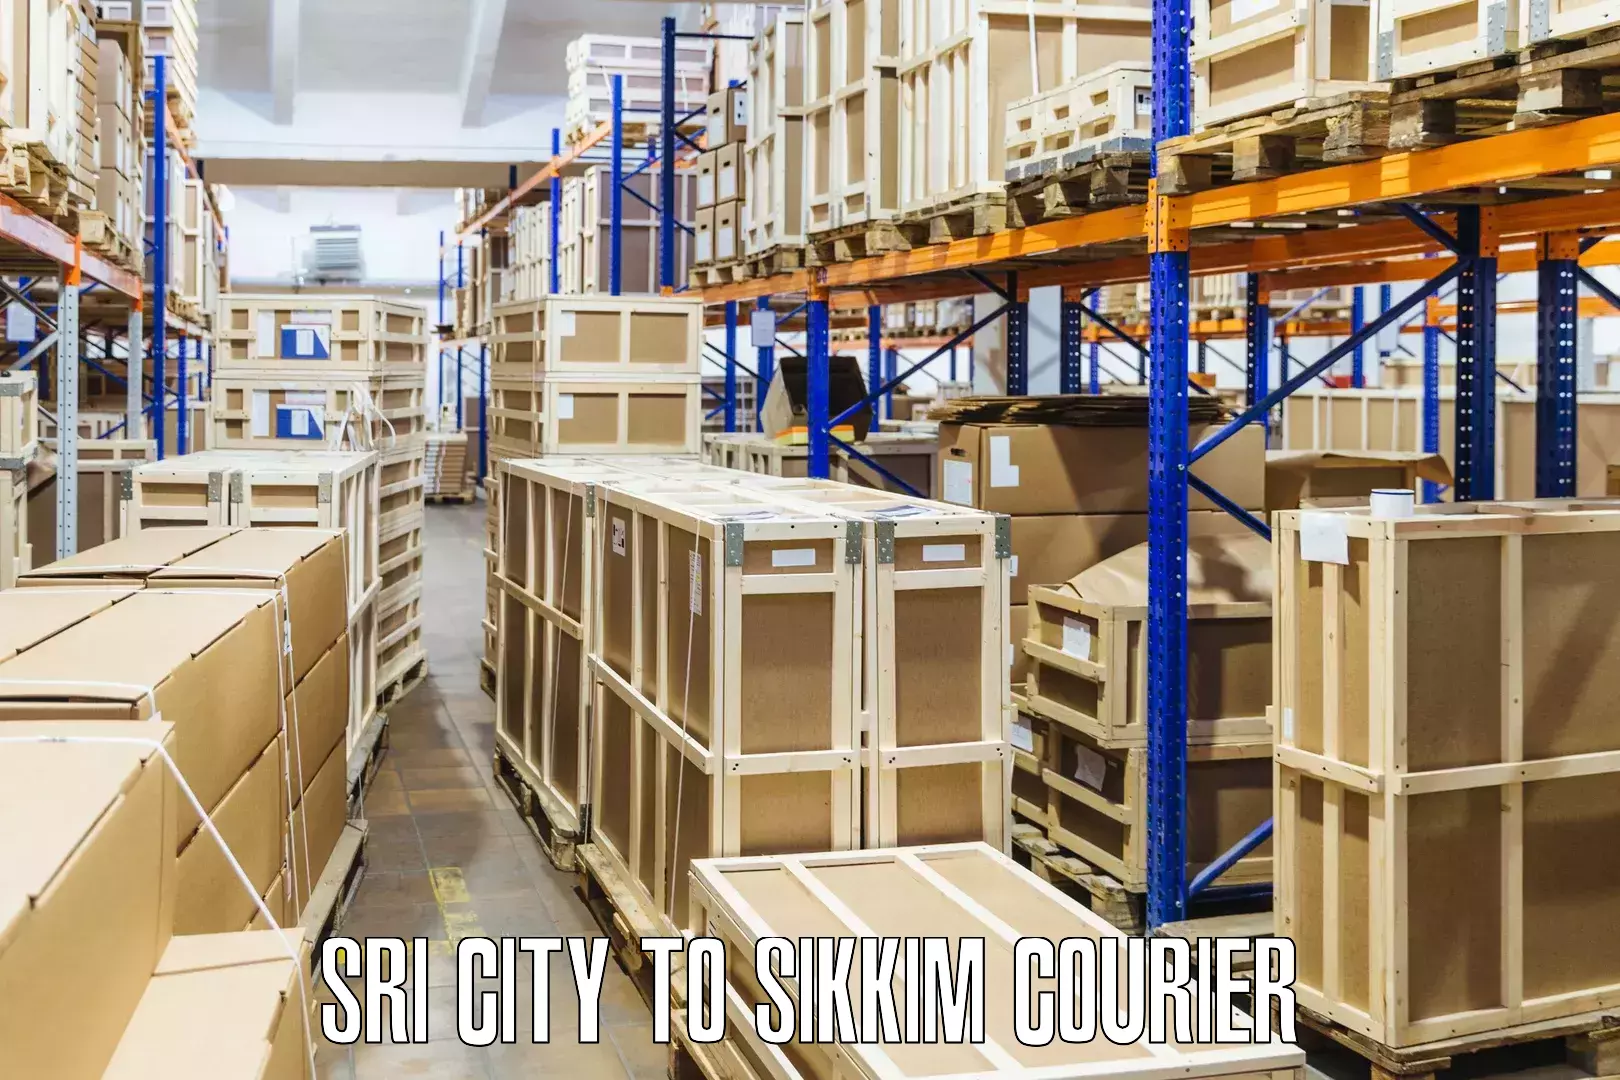 Reliable courier service Sri City to Namchi